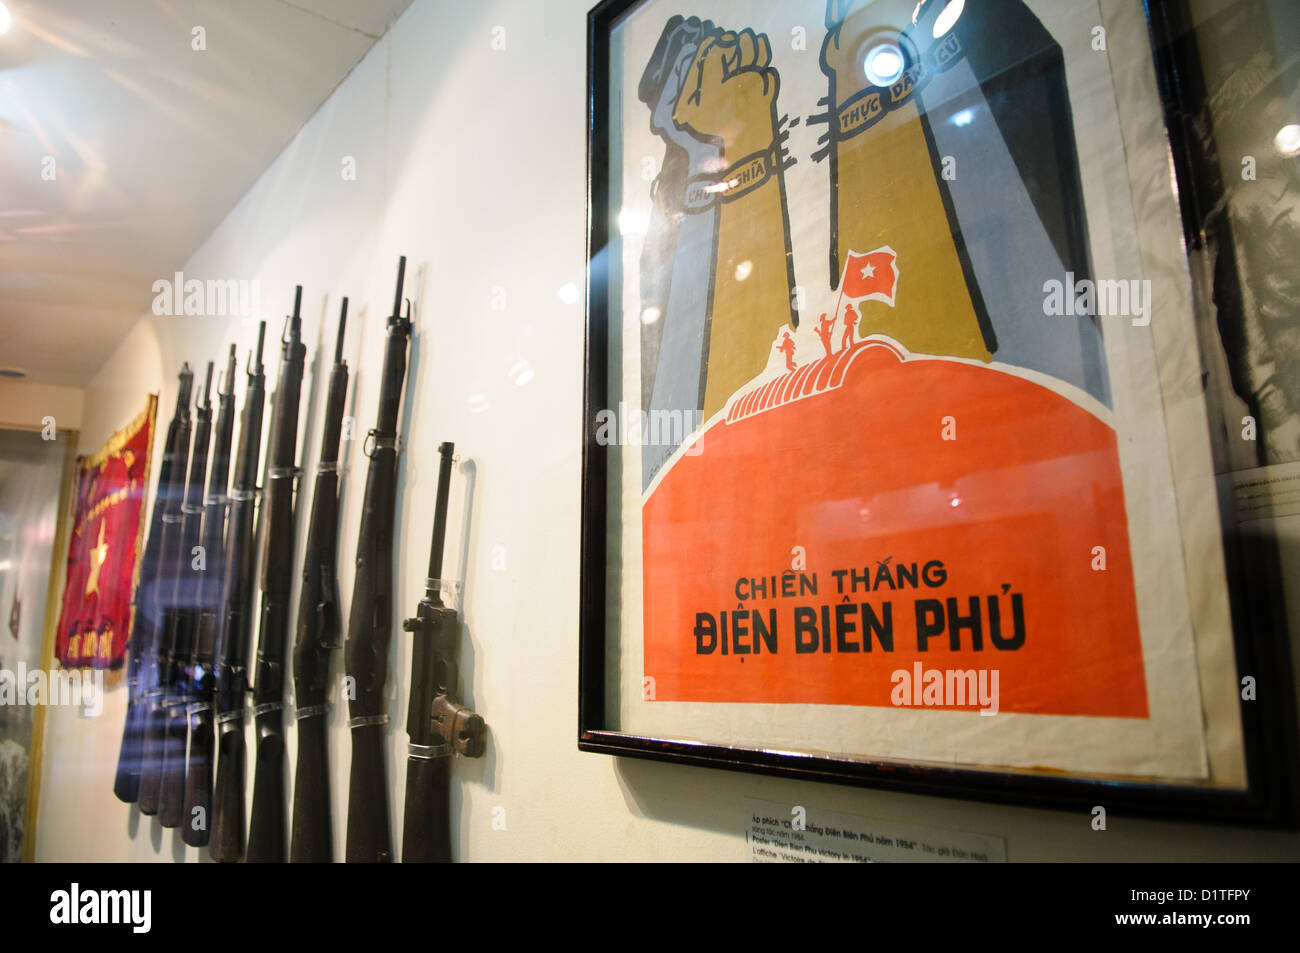 HANOI, Vietnam - At right is a propaganda poster celebrating the Vietnamese victory over the French in 1954 at Dien Bien Phu. At left are weapons used in the battle. The Museum of the Vietnamese Revolution in the Tong Dan area of Hanoi, not far from Hoan Kiem Lake, was established in 1959 and is devoted to the history of the socialist revolutionary movement in Vietnam. Stock Photo